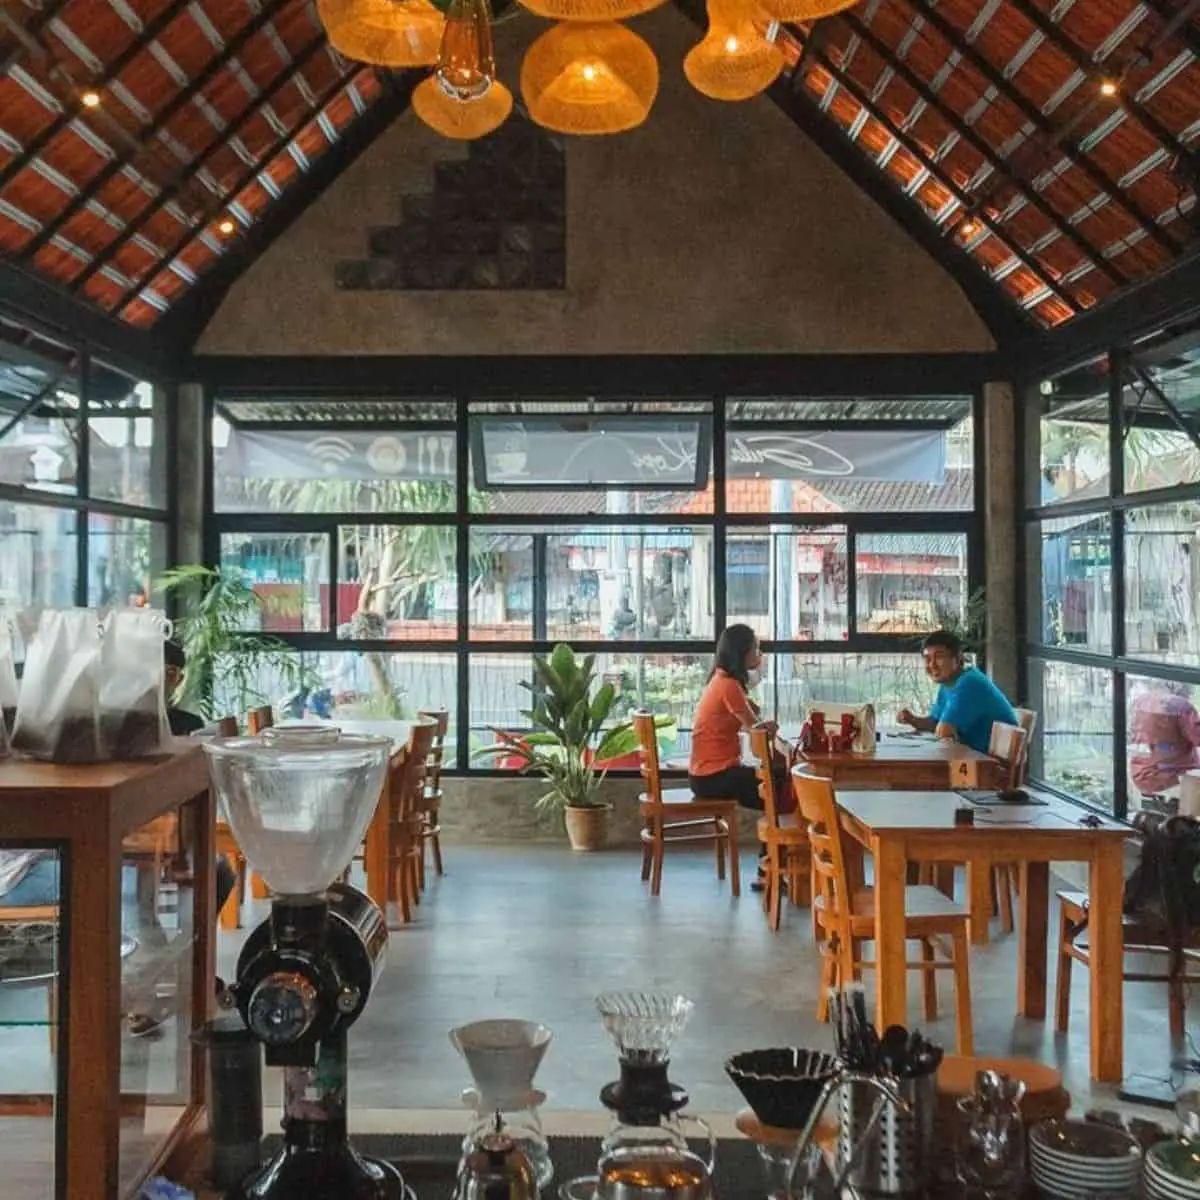 Gula Kopi Bali comfortable cafe to work or chill in